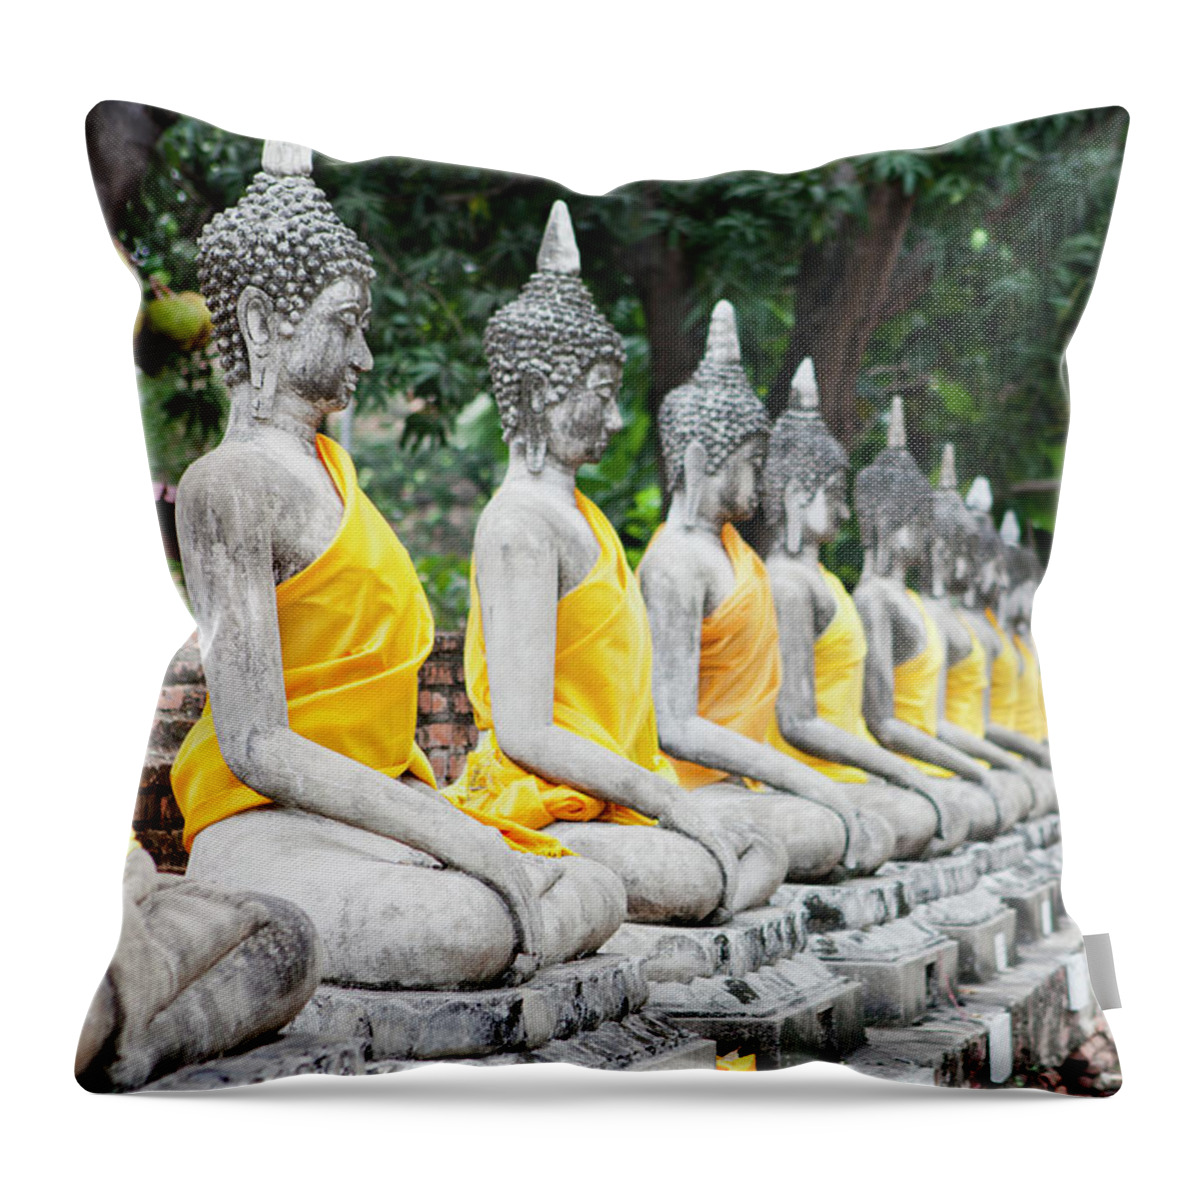 Statue Throw Pillow featuring the photograph Buddha Statues by Etrix